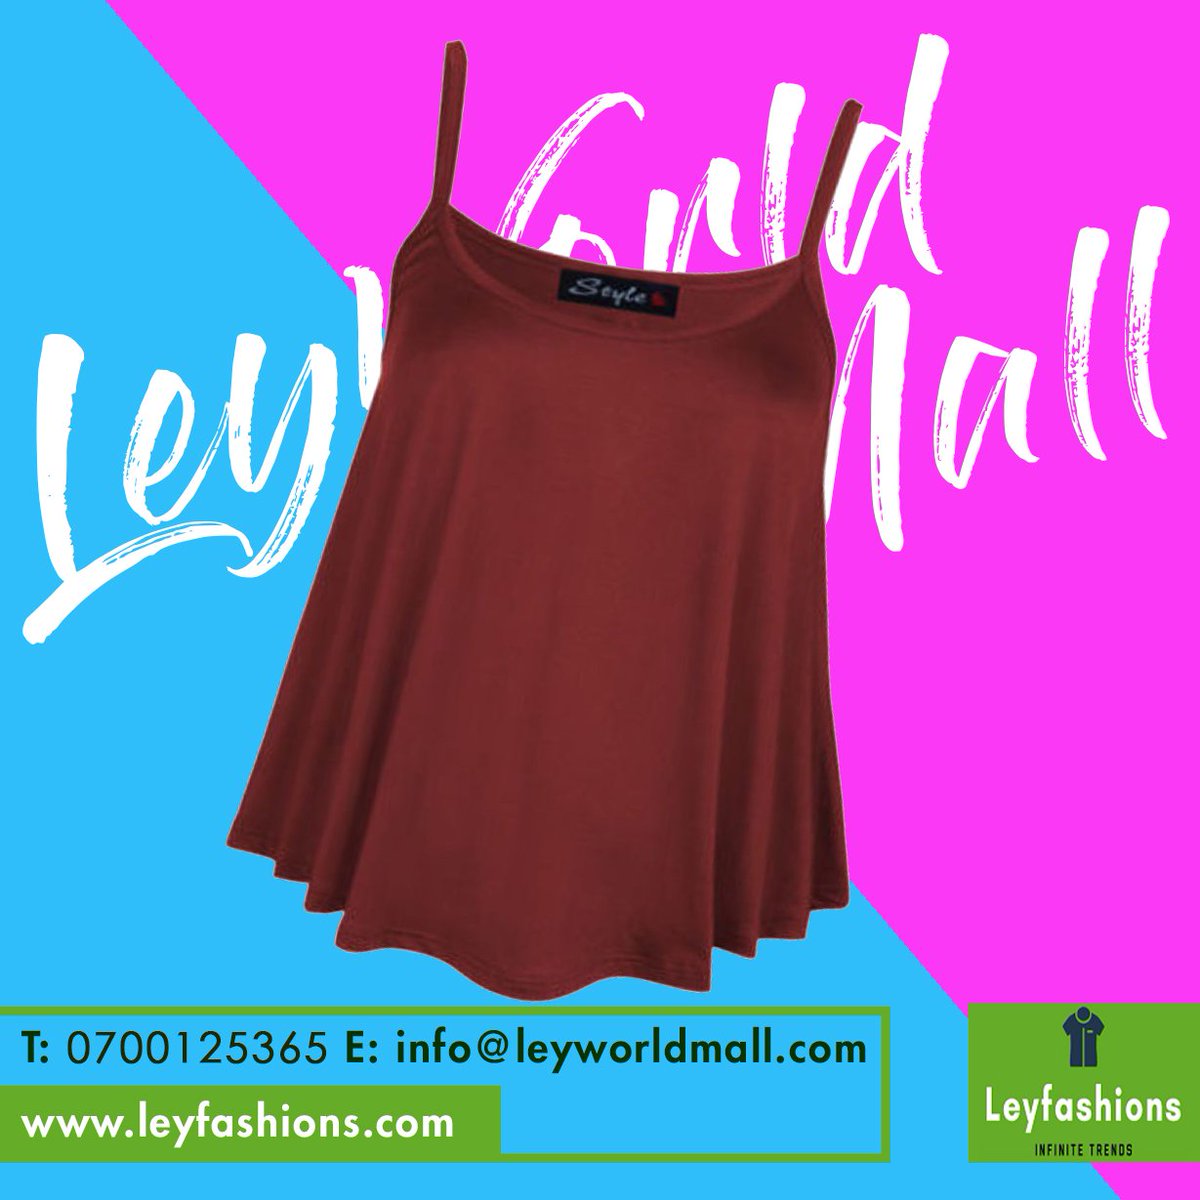 Style is what you pick out of Fashion. Grab the latest collections today with free delivery within Nairobi CBD #CheapClothes #OnlineShopping contact 0700125365 Email: .Visit leyworldmall.com